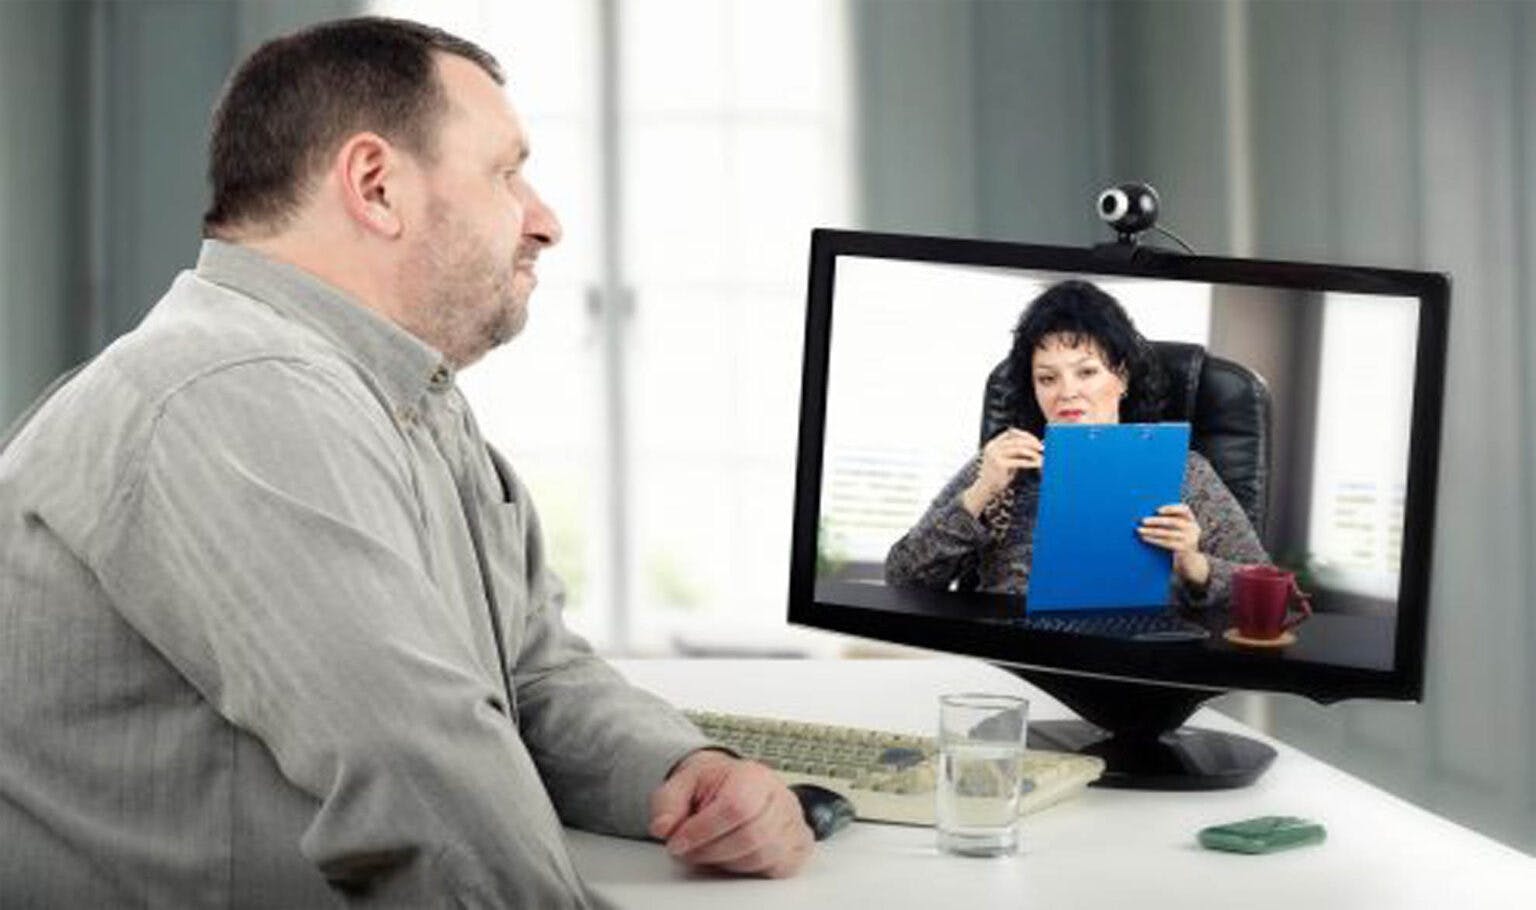 CLINICAL SERVICES USING TELEHEALTH PLATFORM: